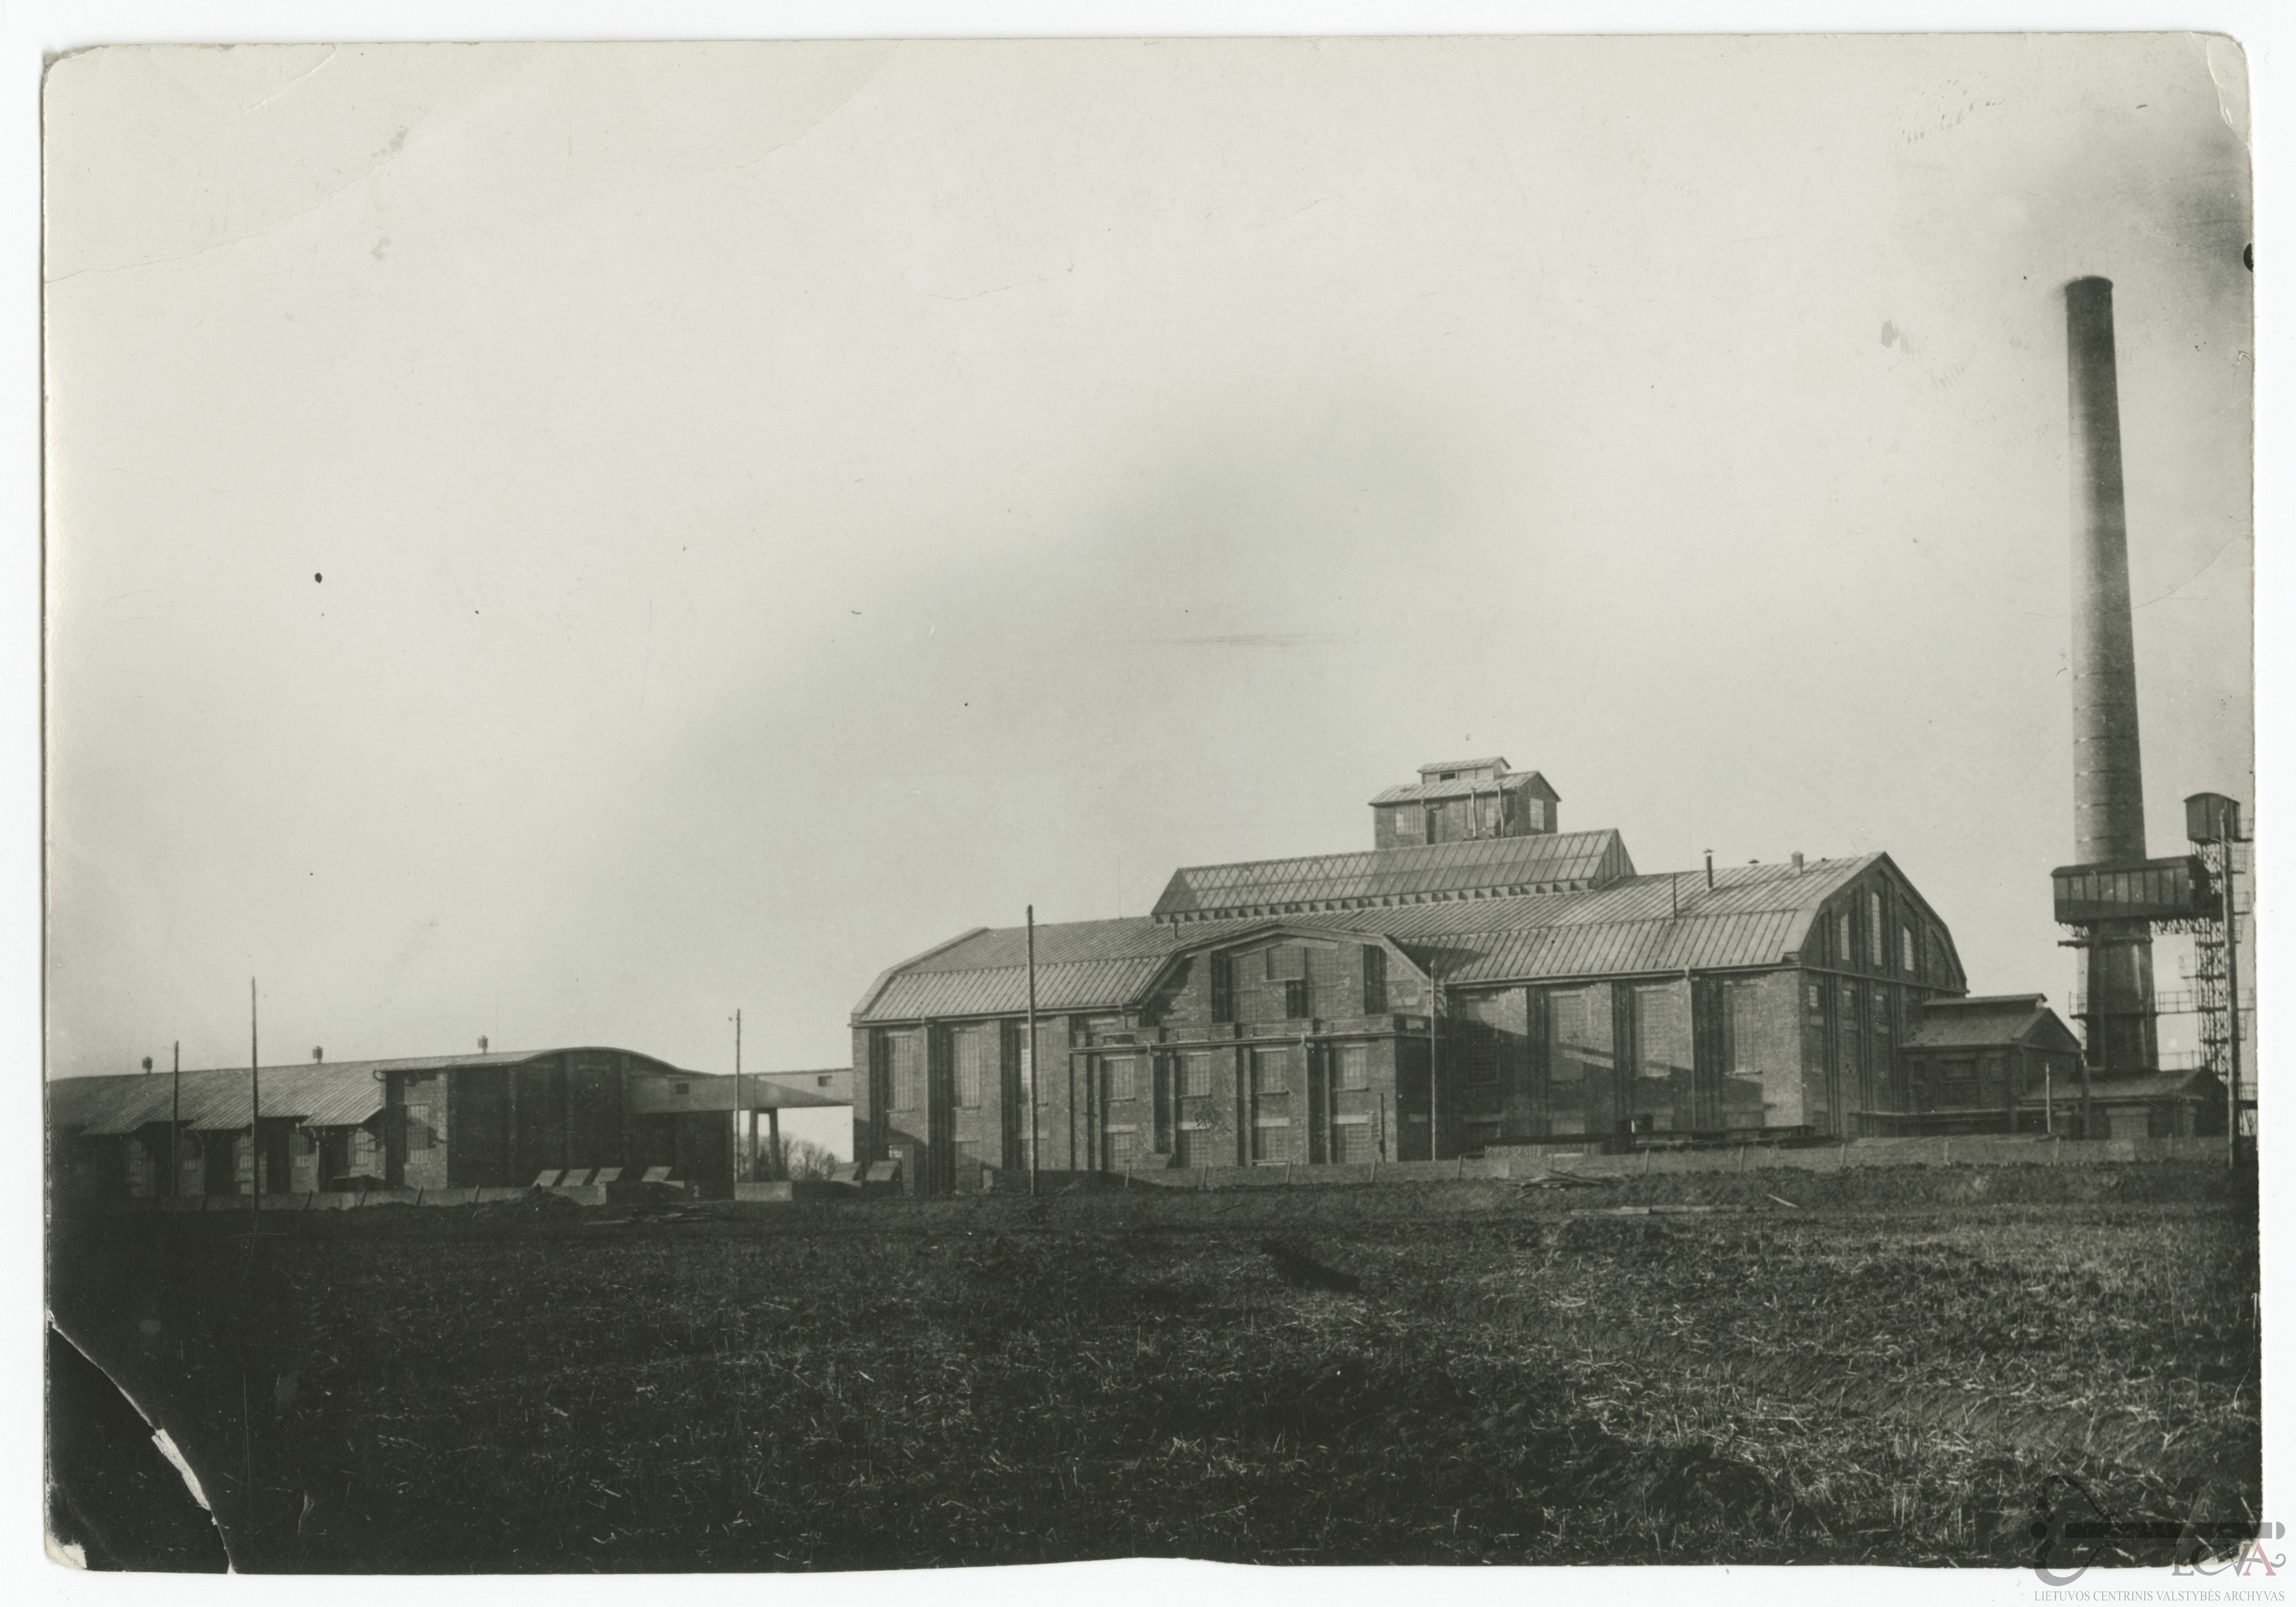 Sugar factory. Marijampolė, 1931. Photograph: M. Buchhalter. Lithuanian Central State Archives, P-06383